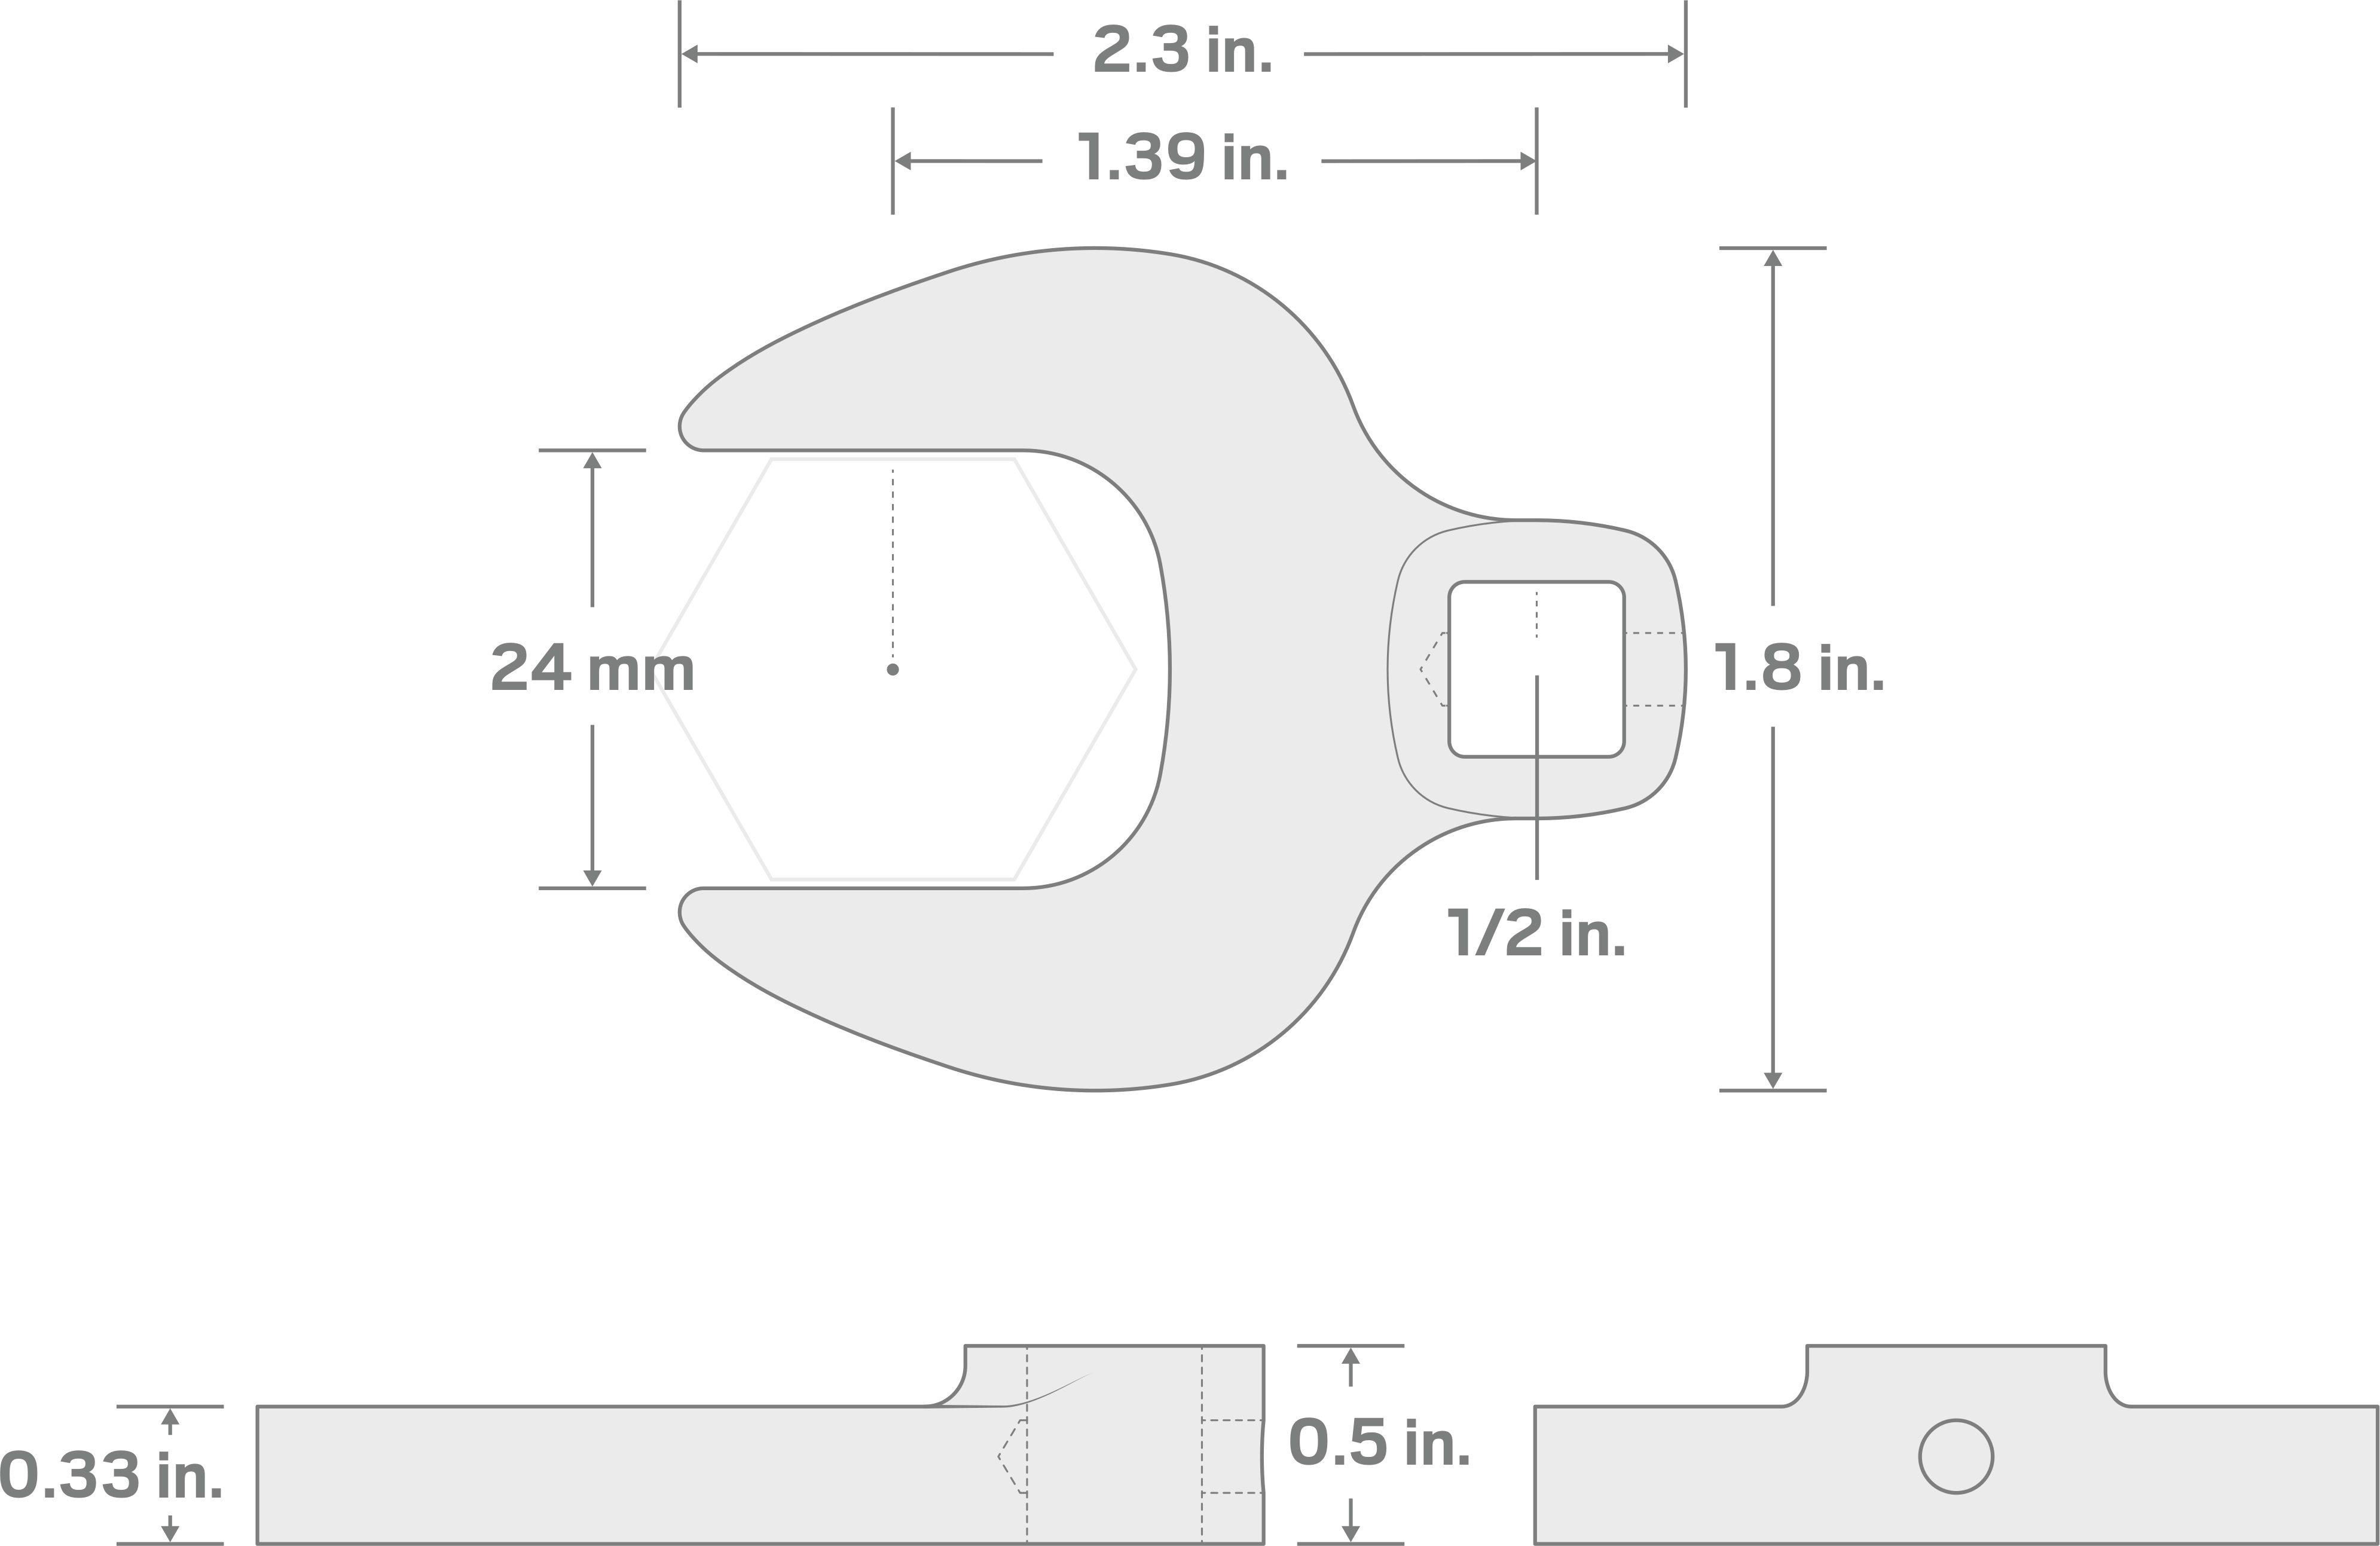 Specs for 1/2 Inch Drive x 24 mm Crowfoot Wrench